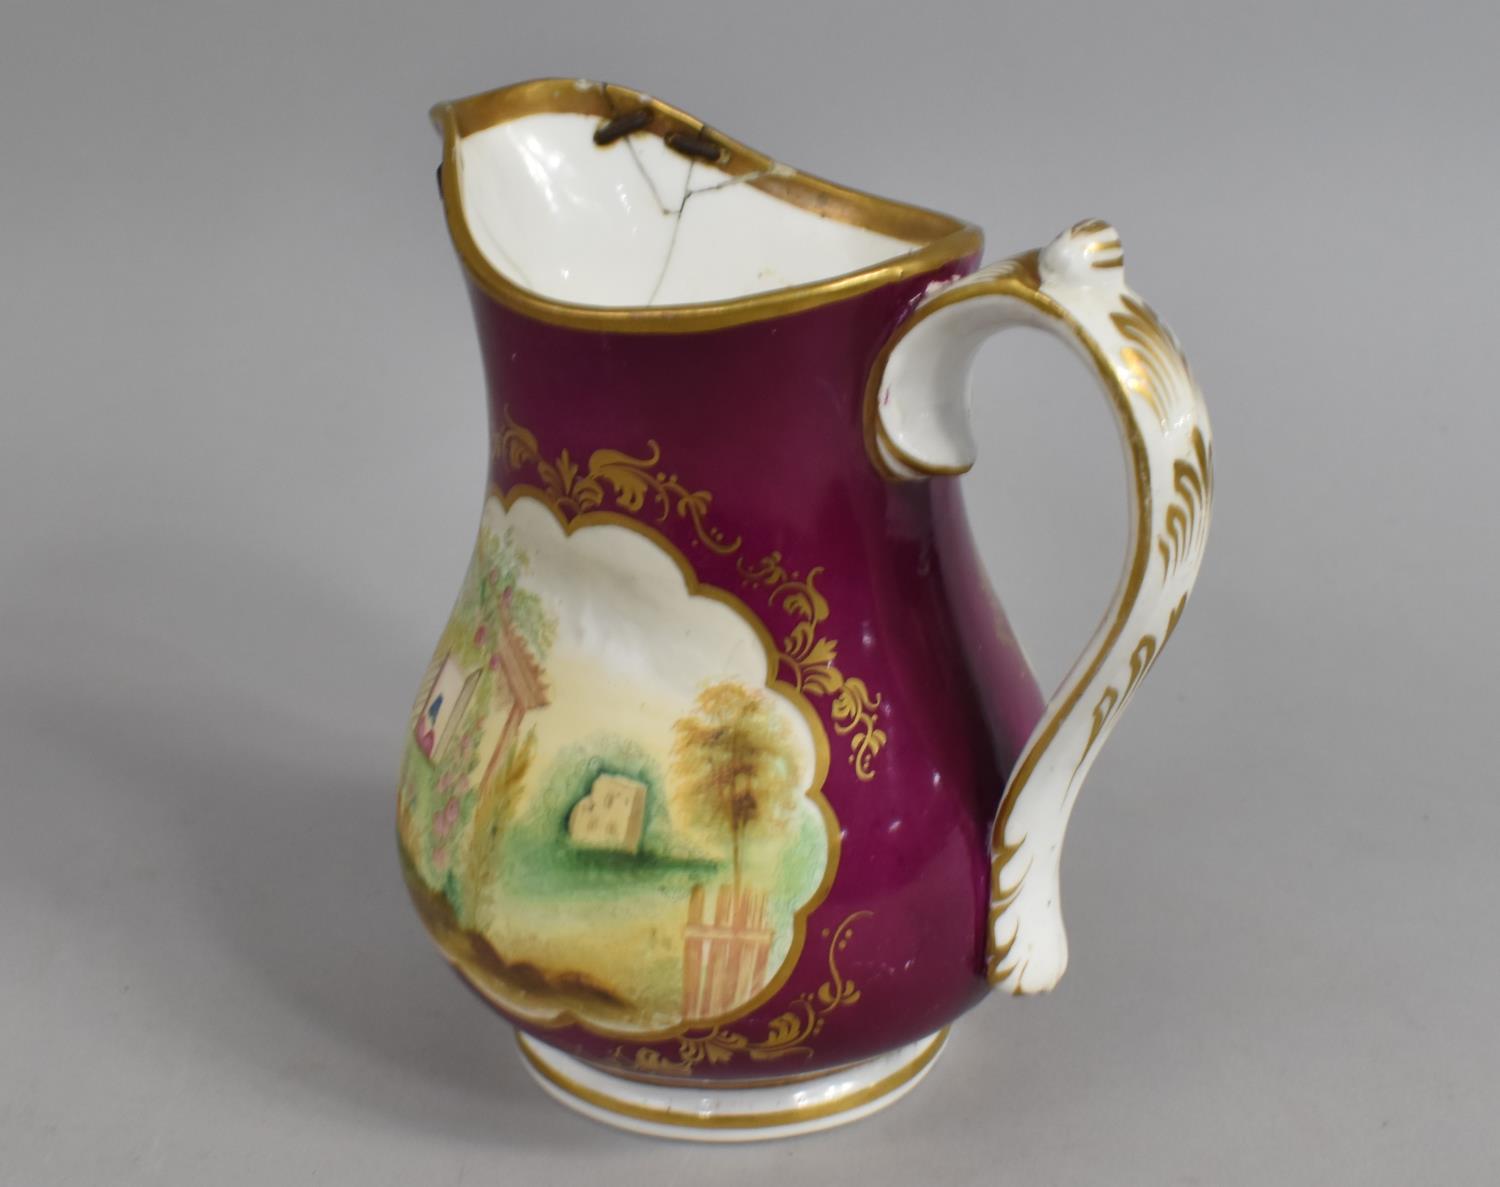 A 19th Century Porcelain Jug with Hand Painted Cartouches on Puce Ground, Inscribed in Gilt James - Image 4 of 5